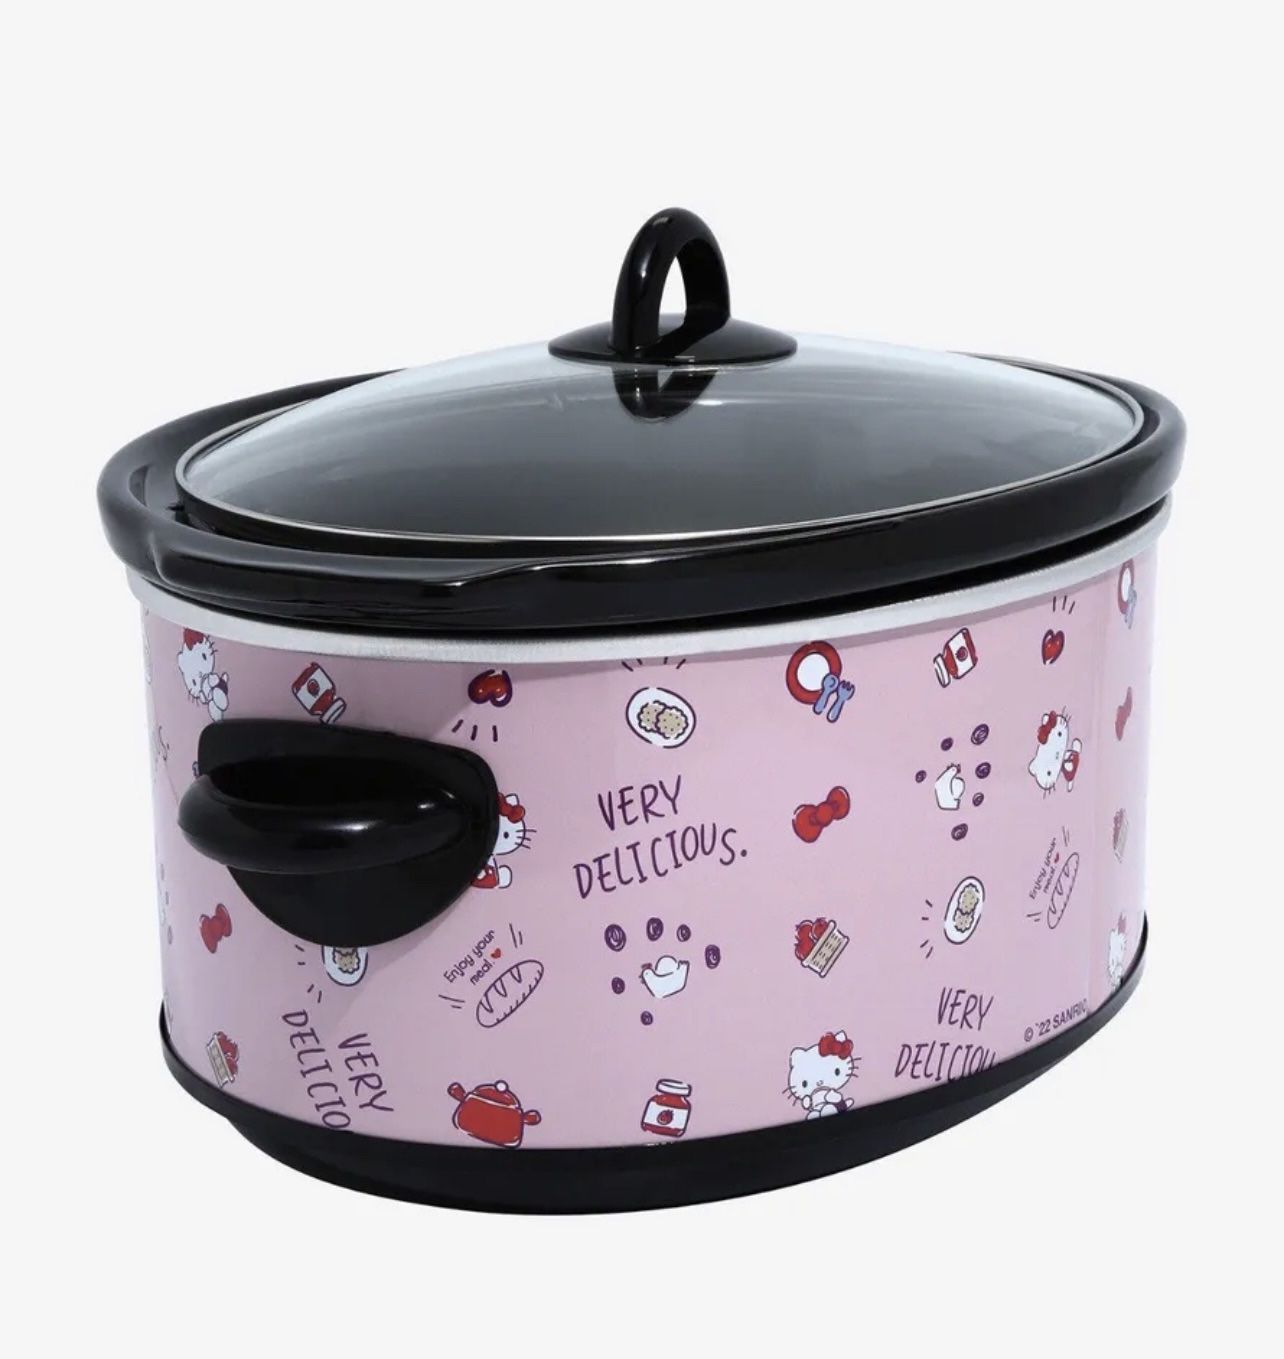 Got this hello kitty slow cooker for only $25 on offer up yesterday!! In  love!!! : r/HelloKitty